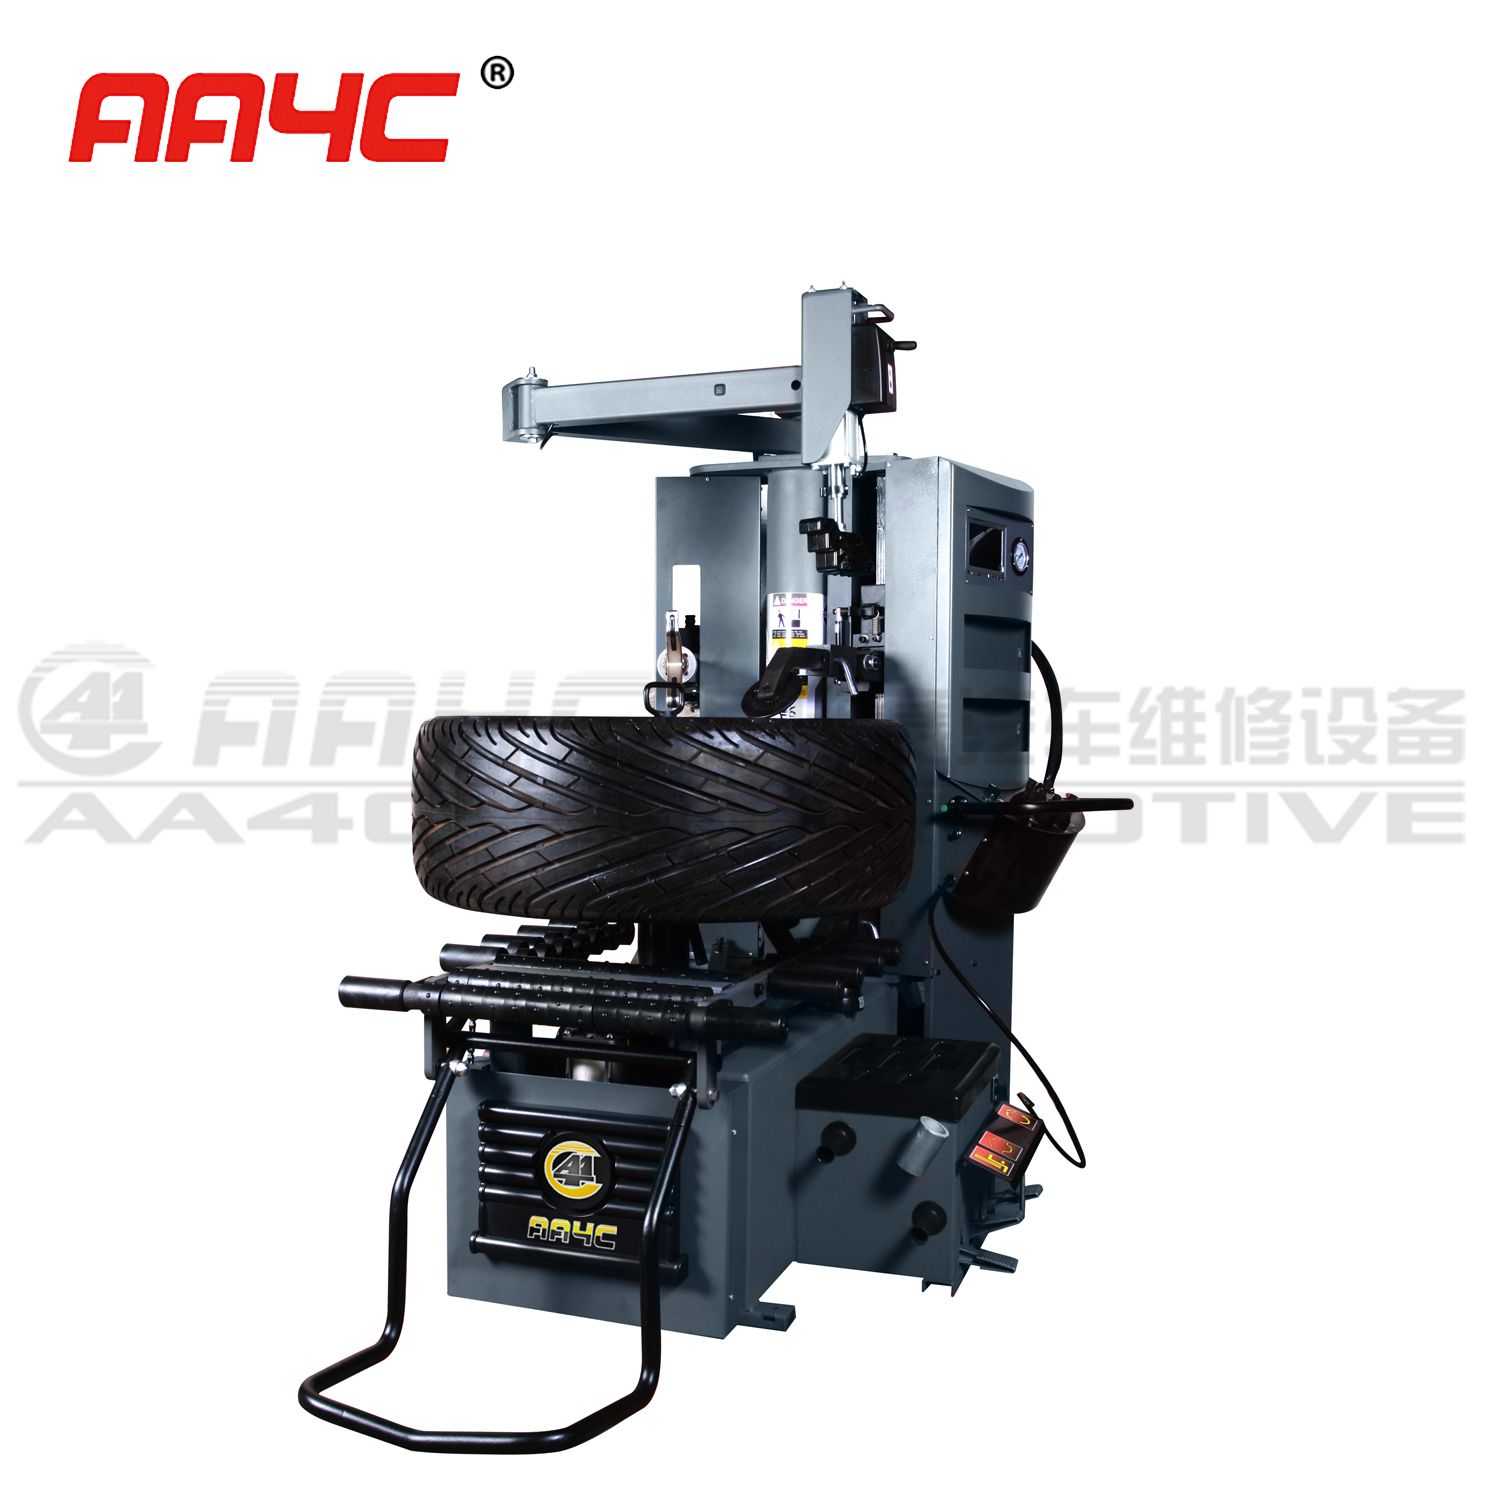 Full Automatic Tire changer  AA-FTC98 